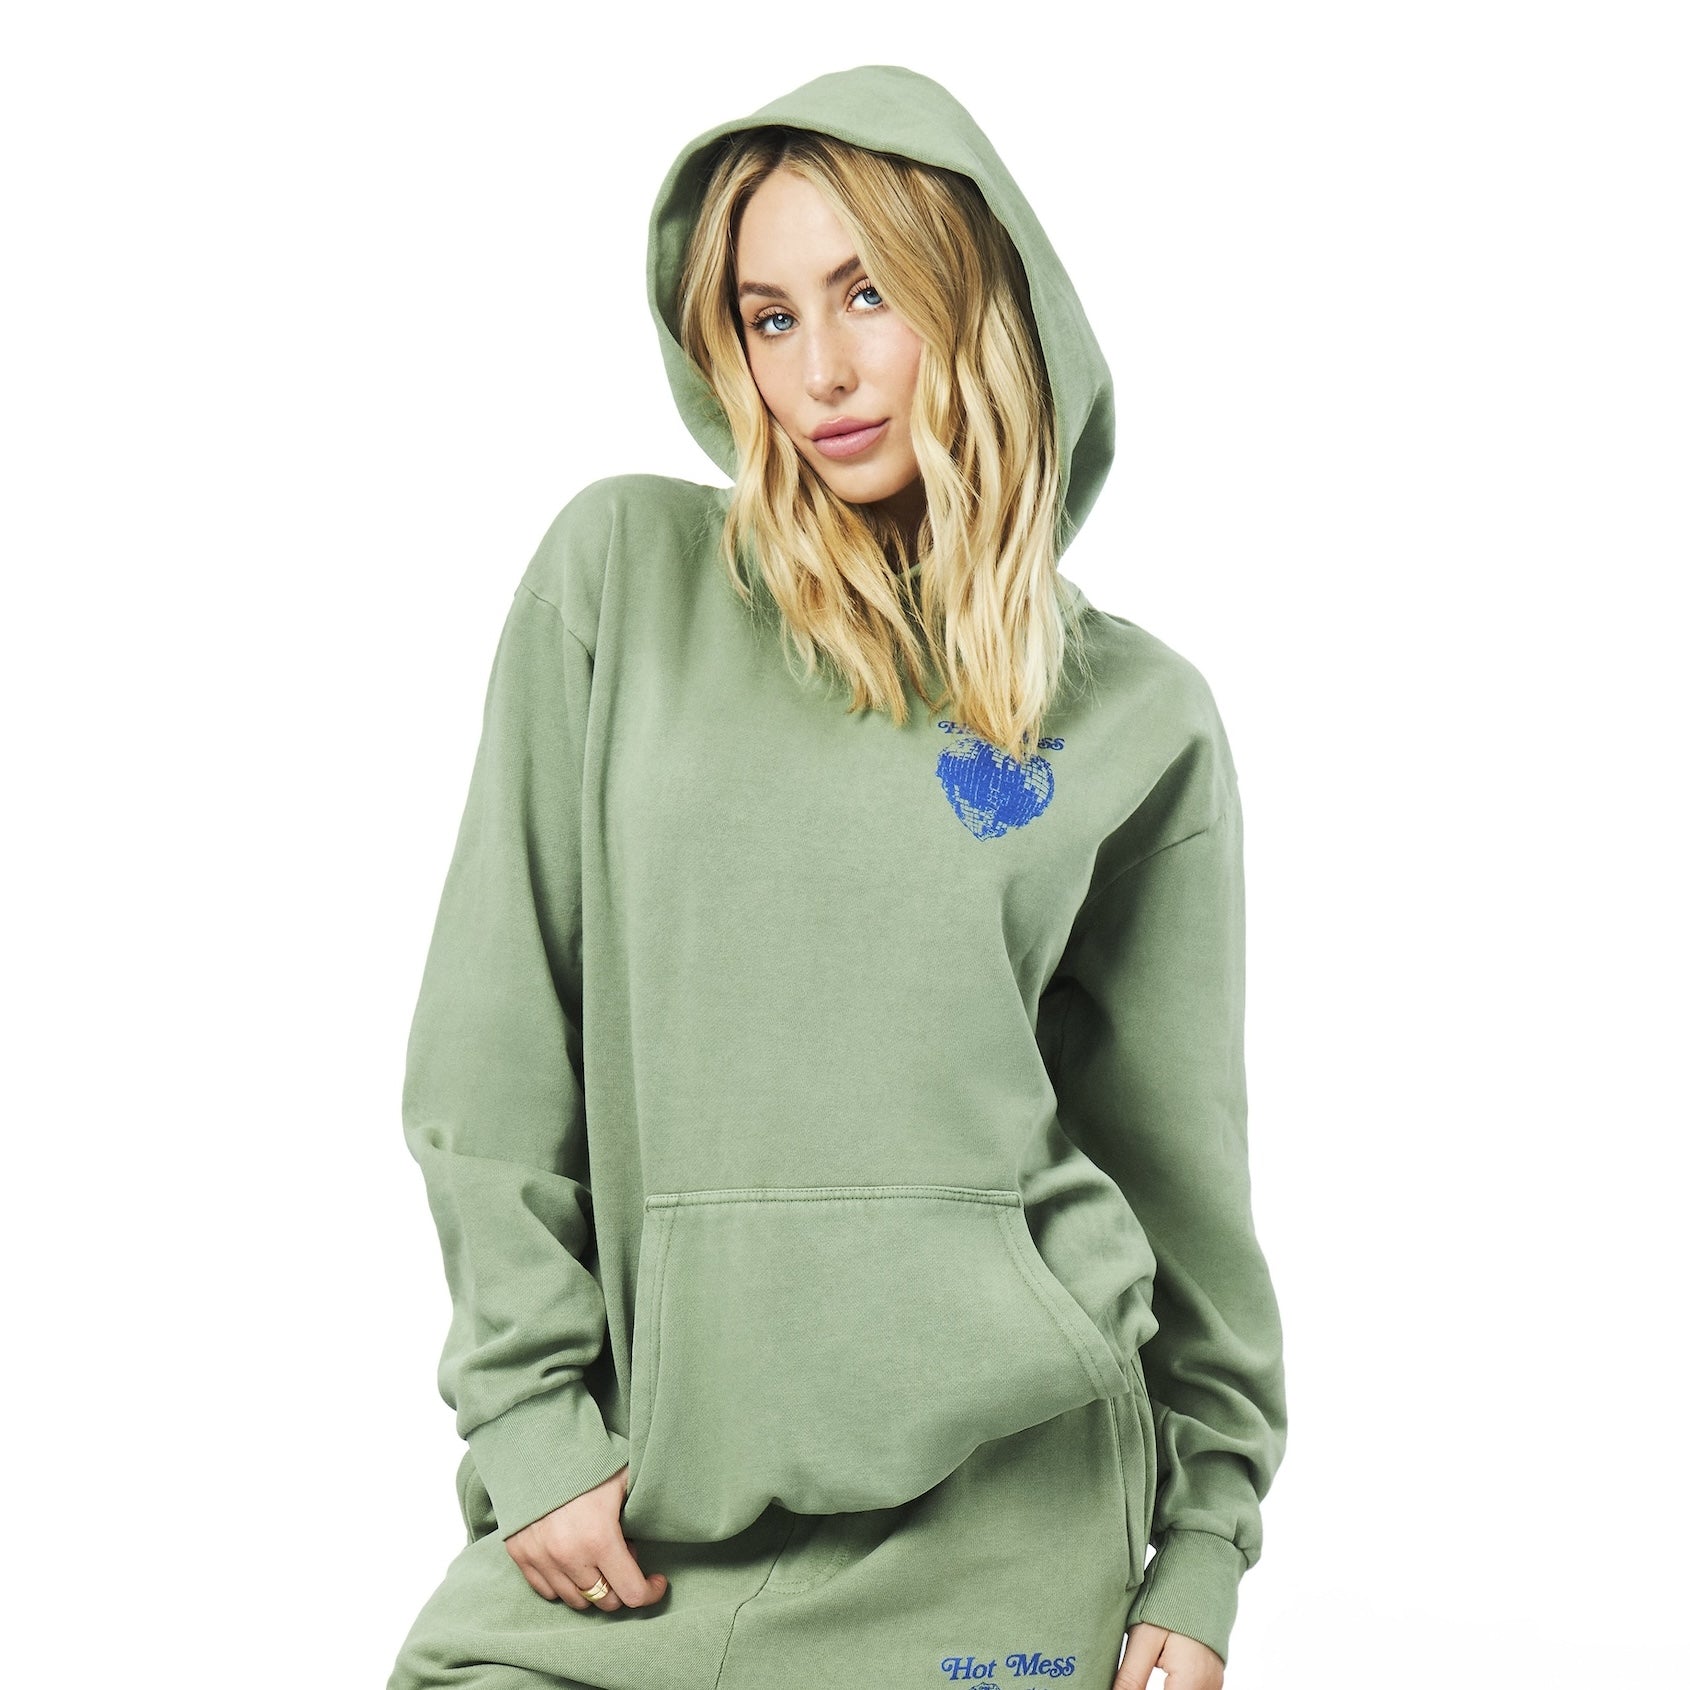 HOT MESS, IT'S A LIFESTYLE HOODIE (GREEN)